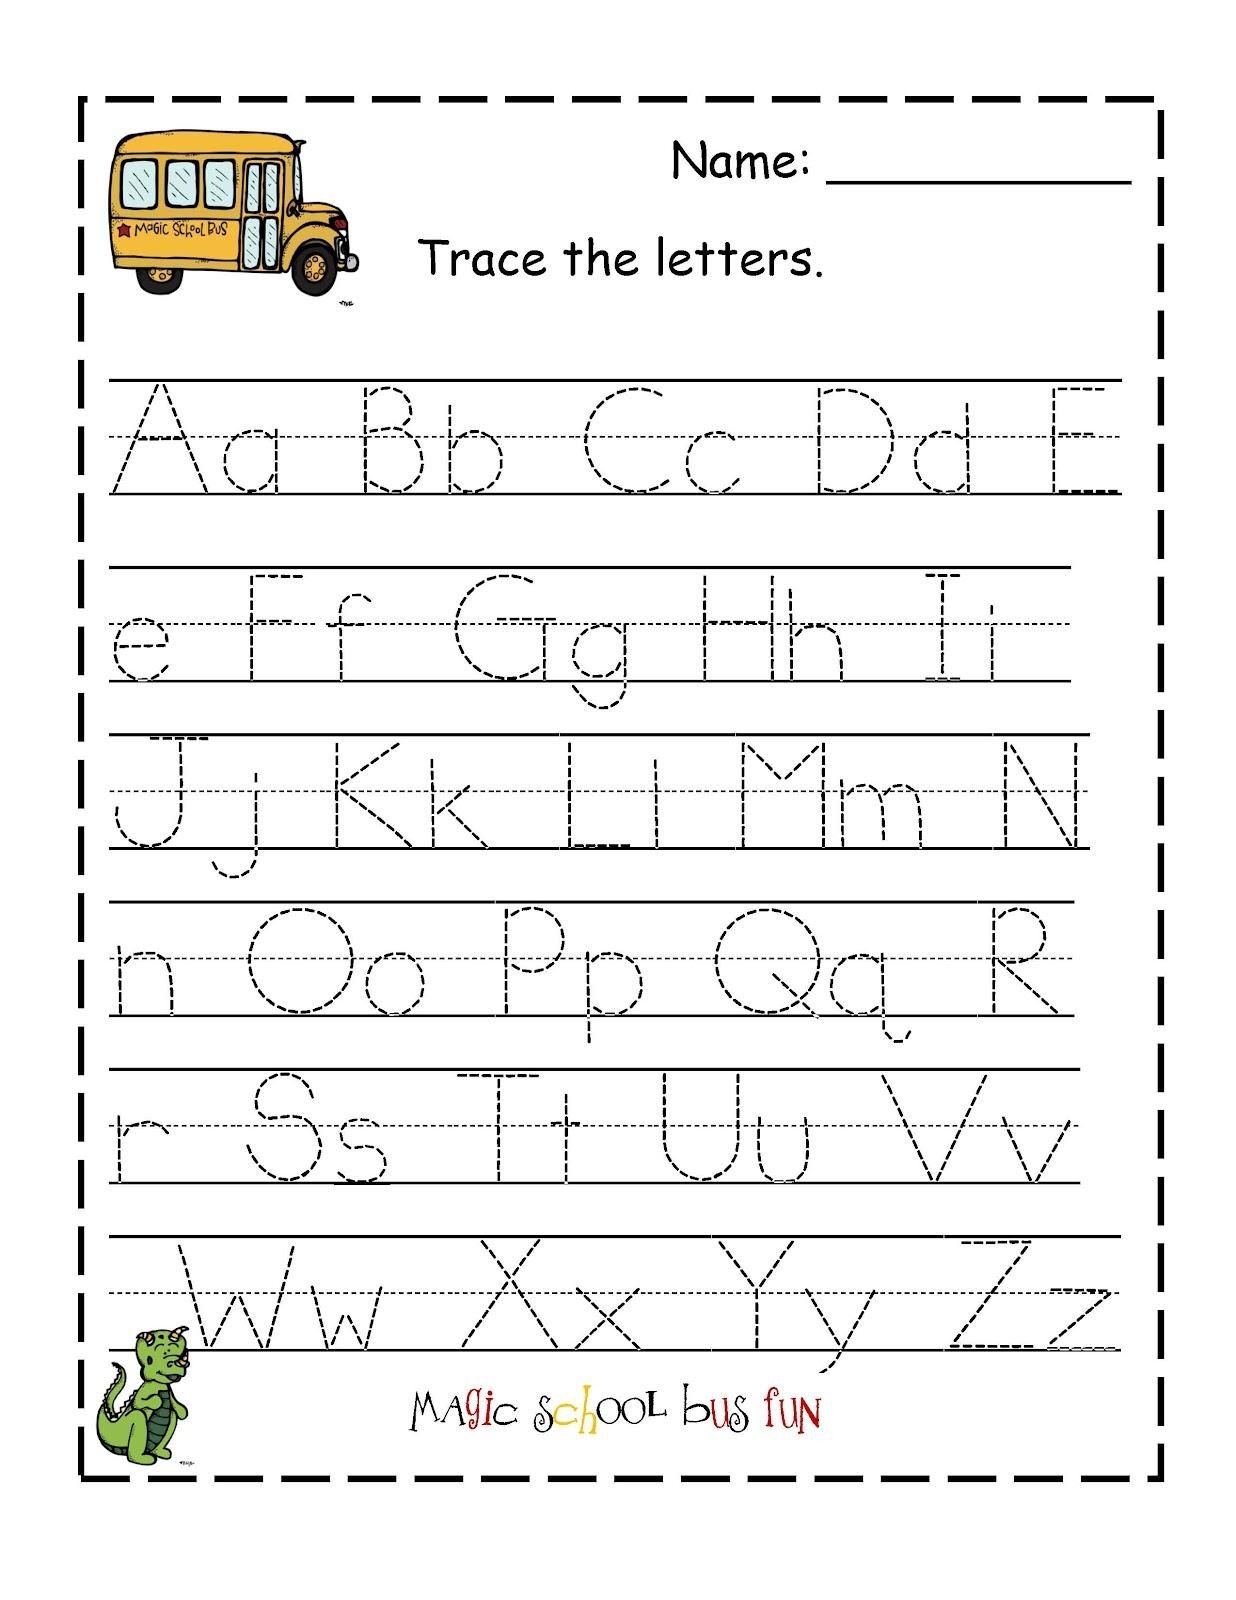 Free Printable Abc Tracing Worksheets #2 | Places To Visit - Free Printable Letter Tracing